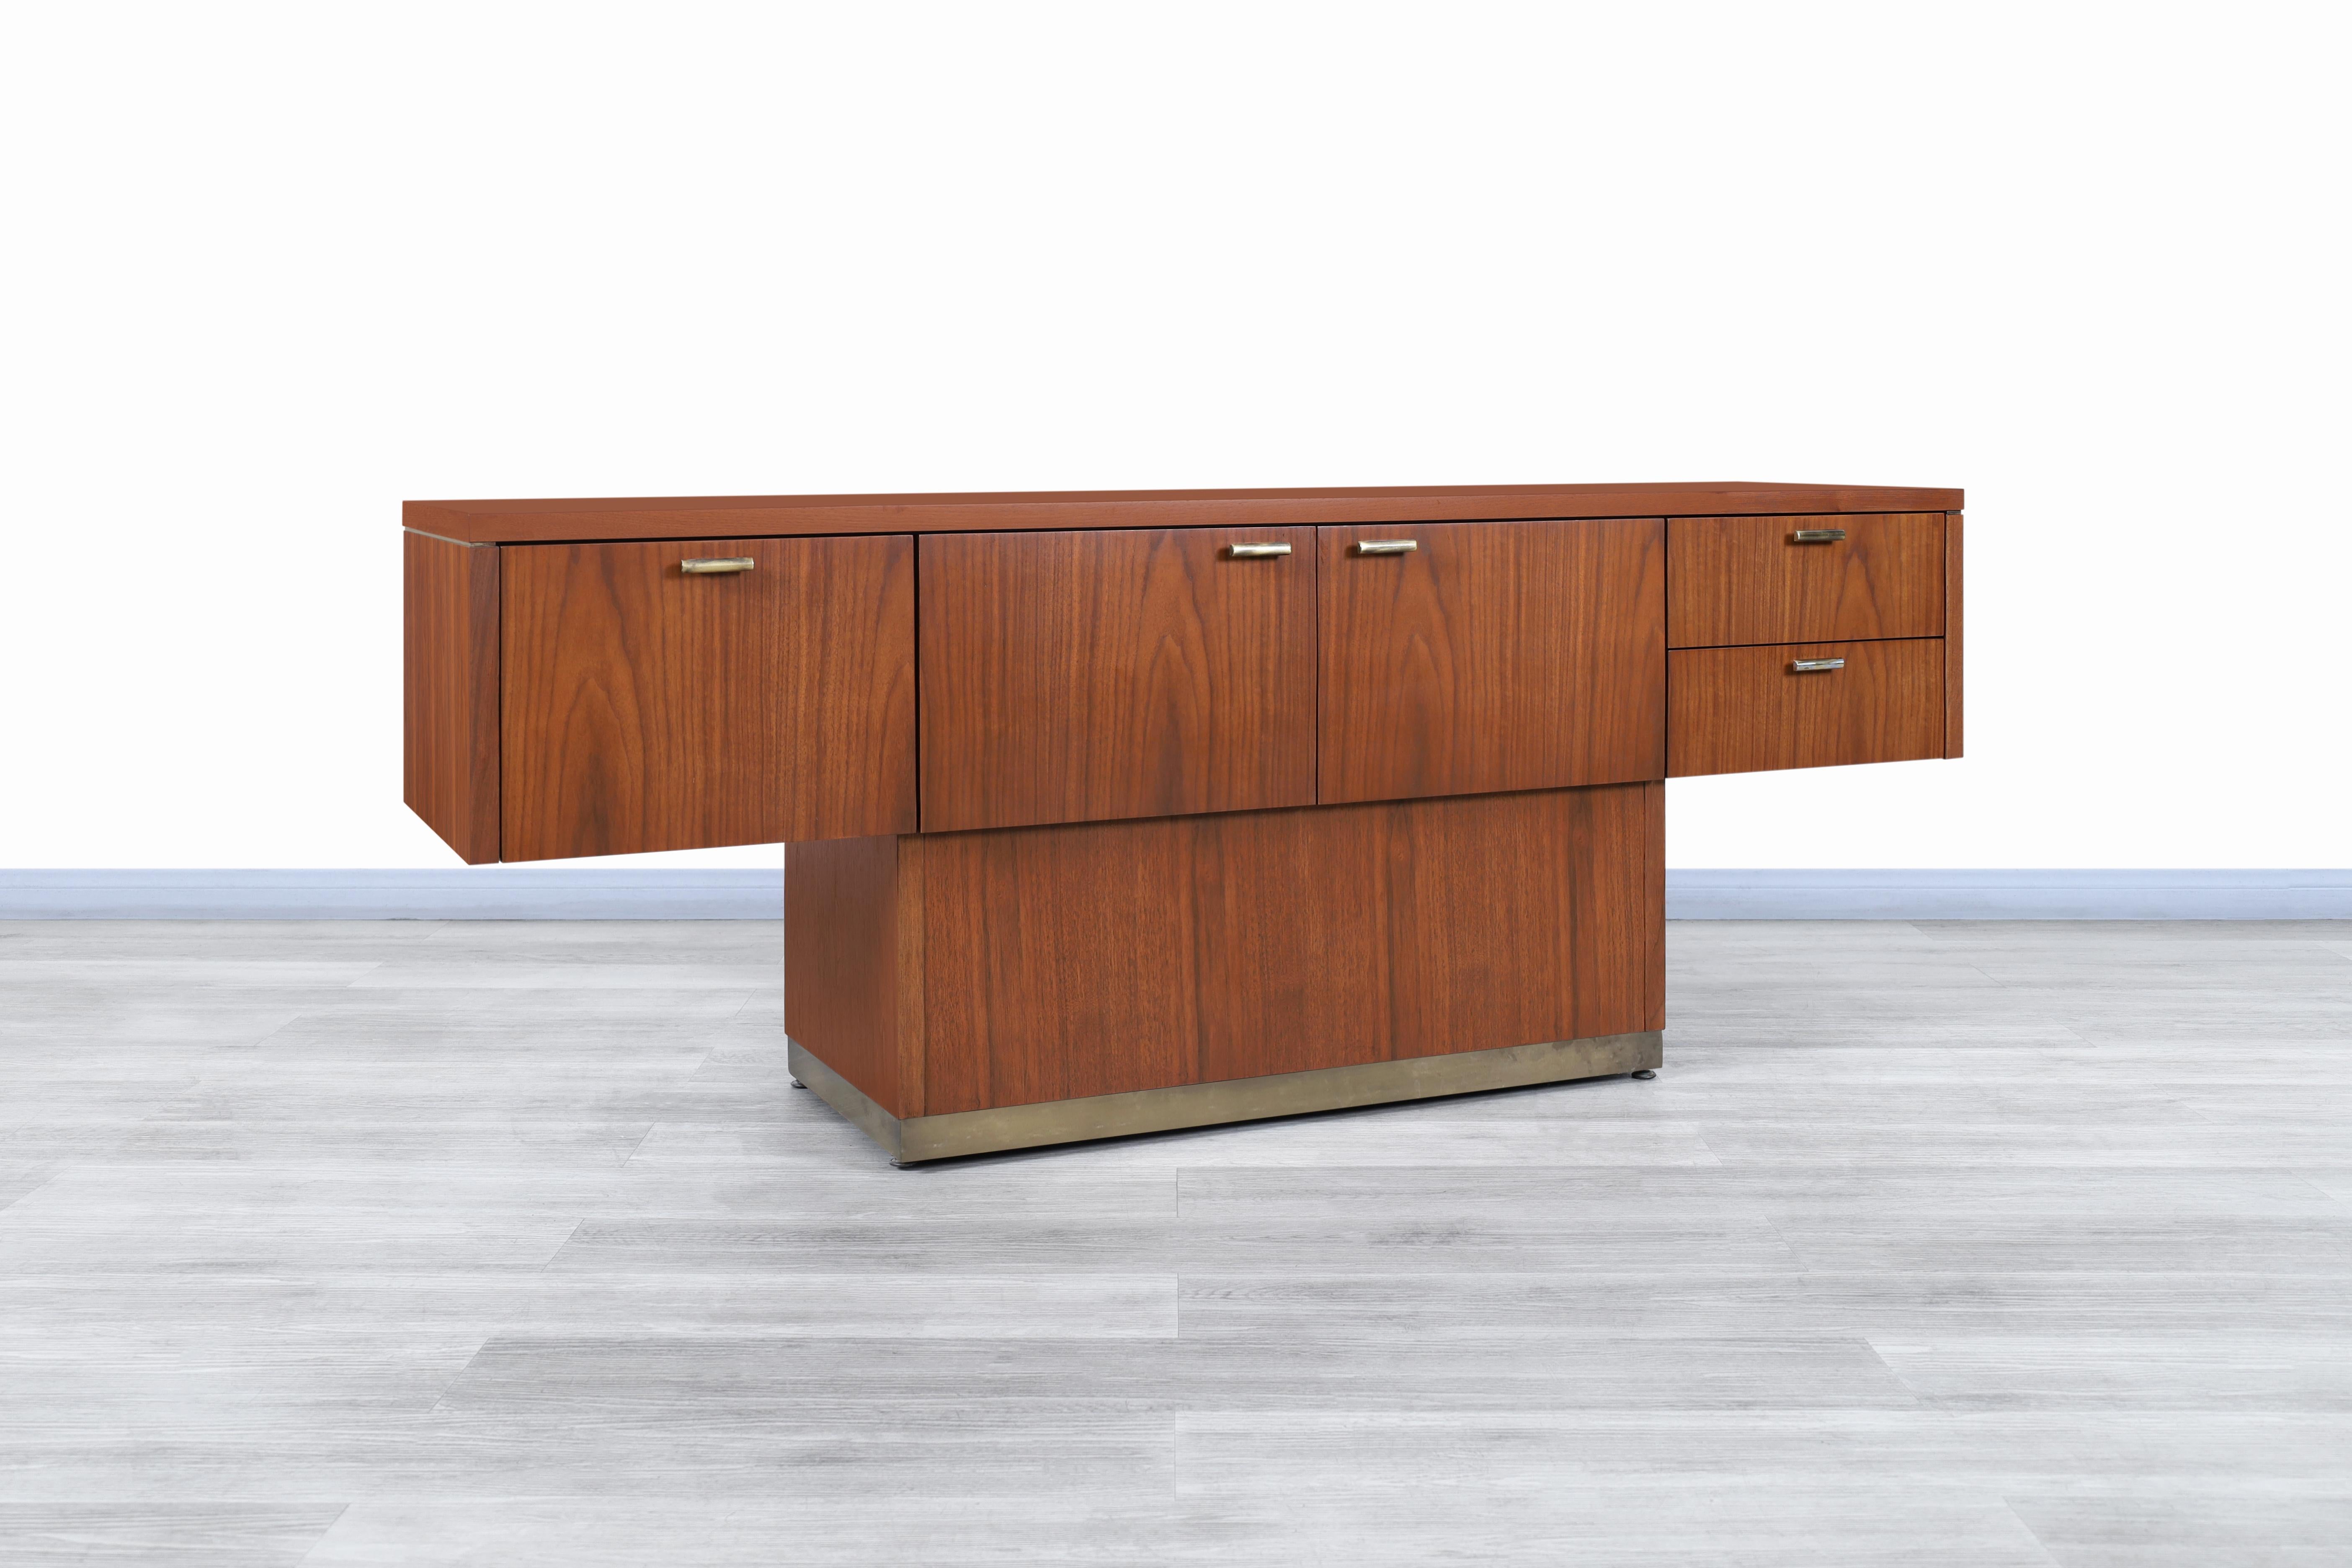 Wonderful vintage walnut and brass cantilevered credenza designed by Myrtle Desk Co. in the United States, circa 1970s. This desk features a cantilevered design supported by a pedestal base with solid brass accents. The desk has been built from